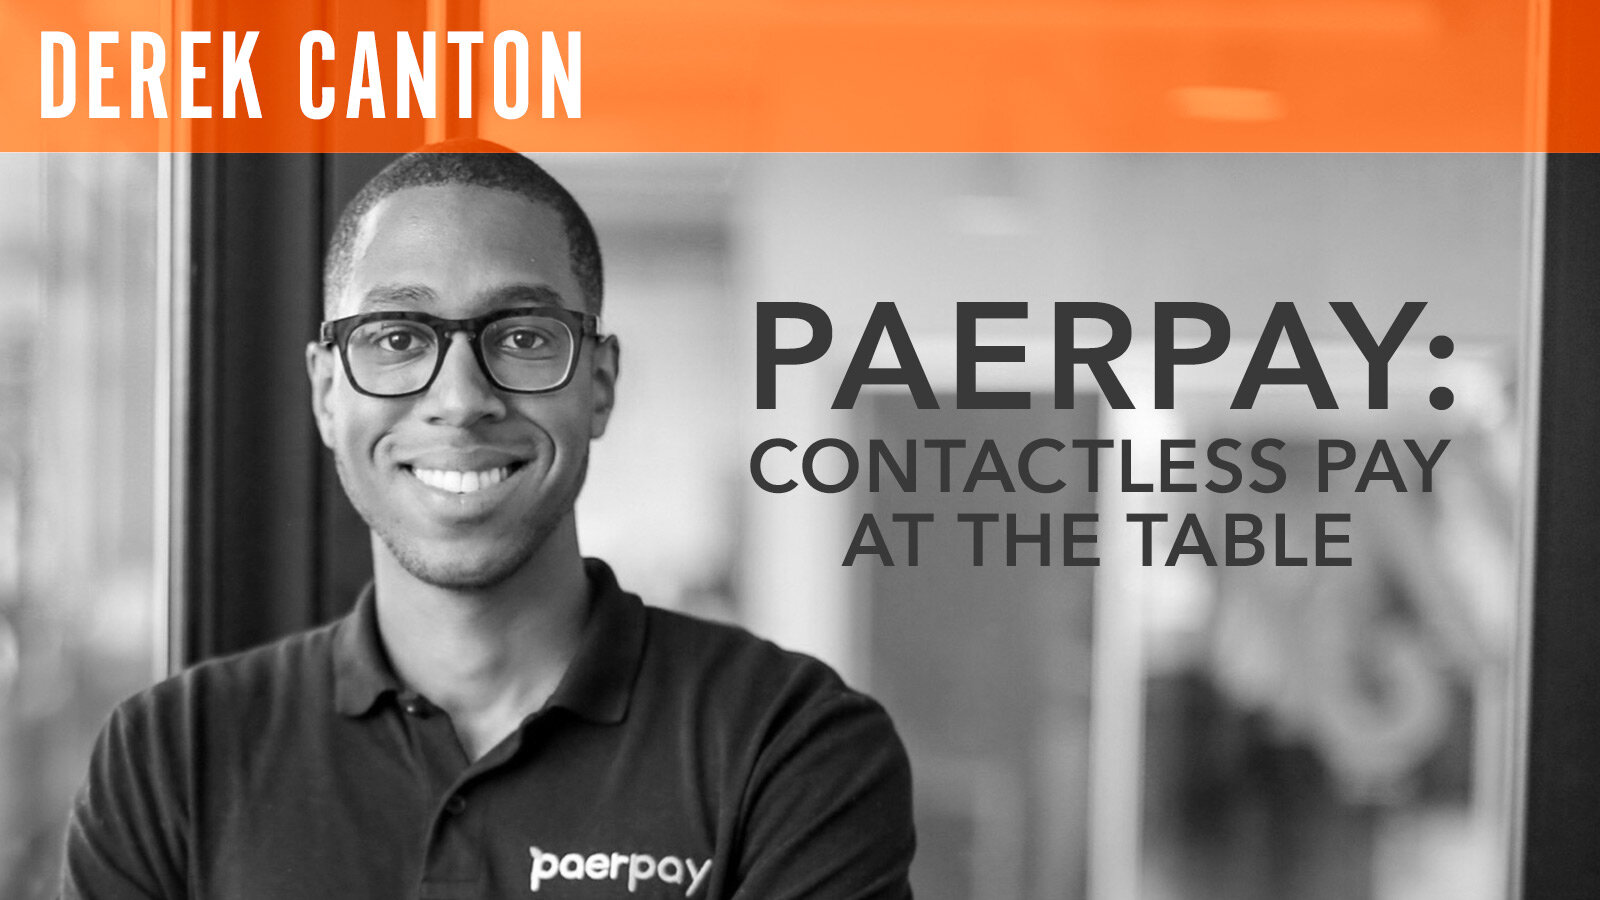 Derek Canton, "Paerpay: Contactless Pay at the Table"